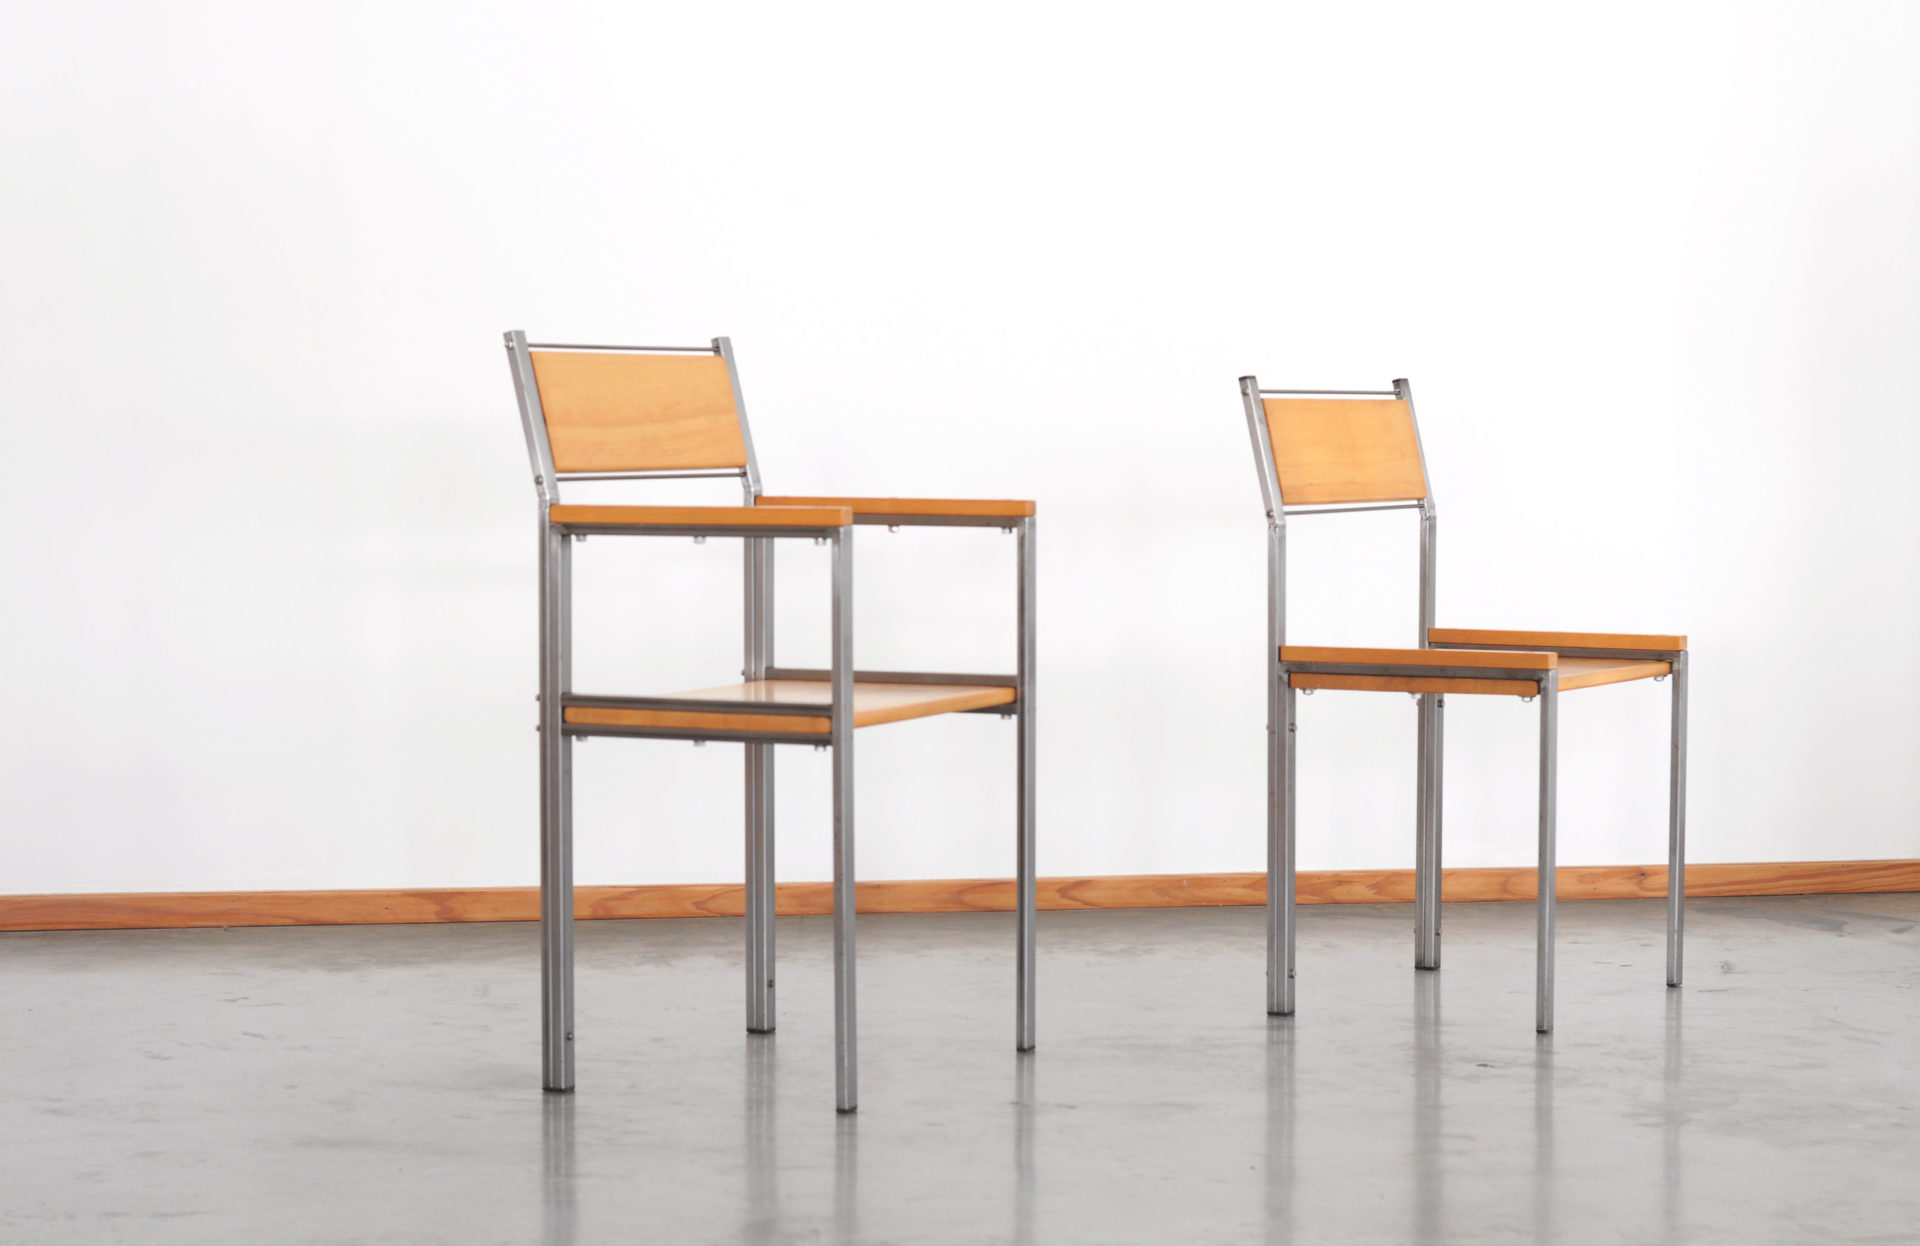 1993 Unique pair of chairs by Gerard Kuijpers, 1993 Steel & wood